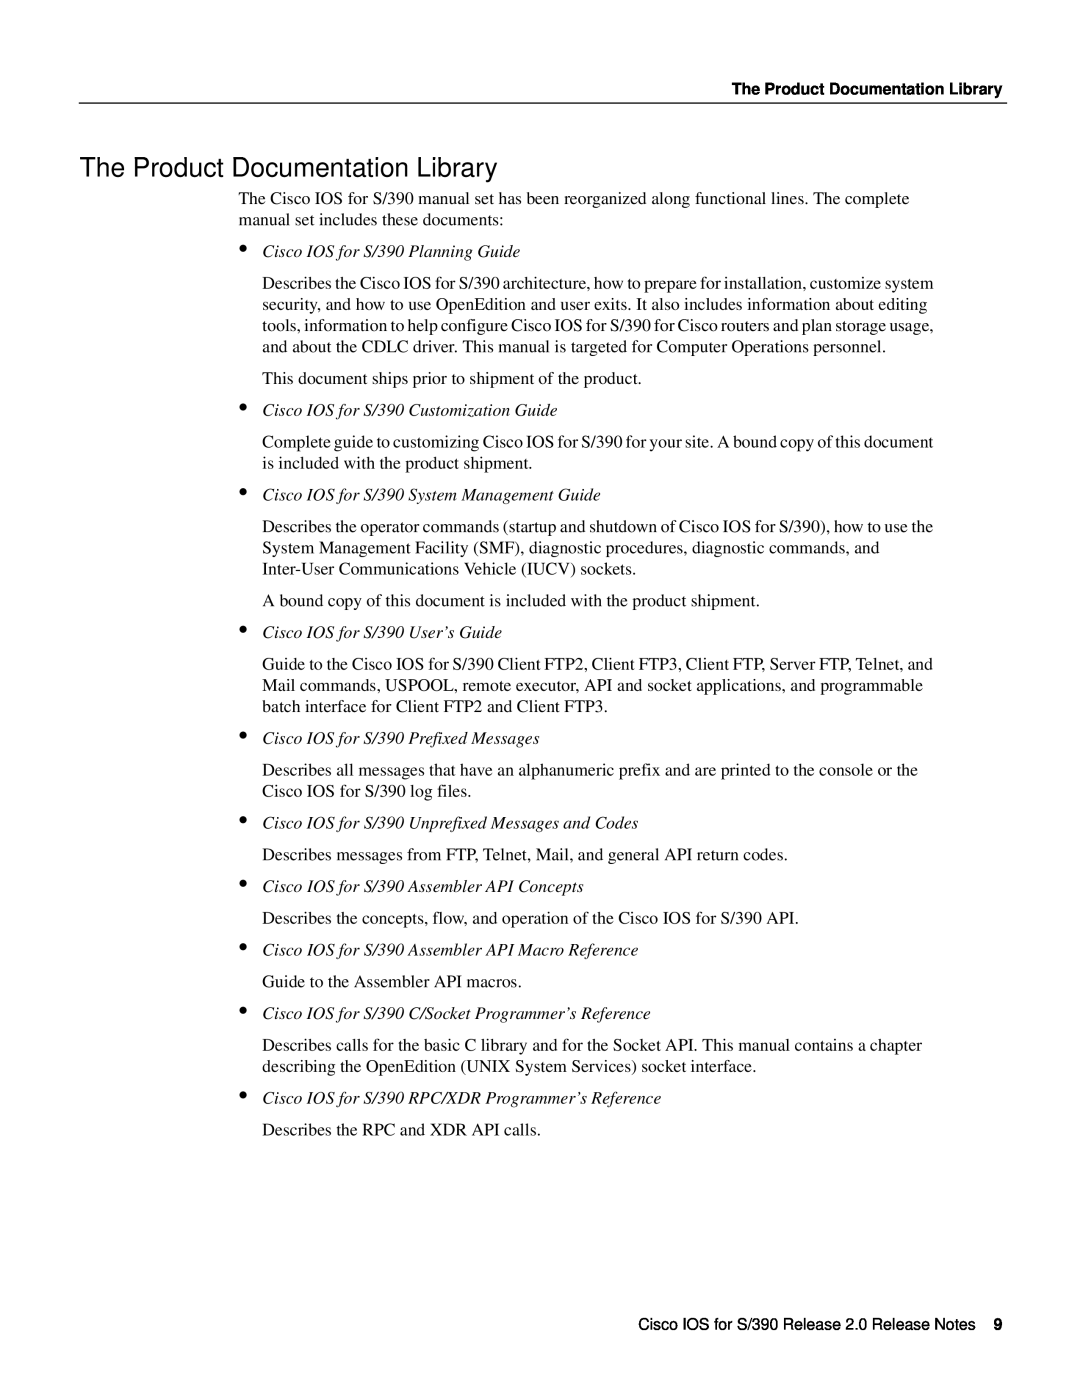 Cisco Systems S/390 manual The Product Documentation Library 